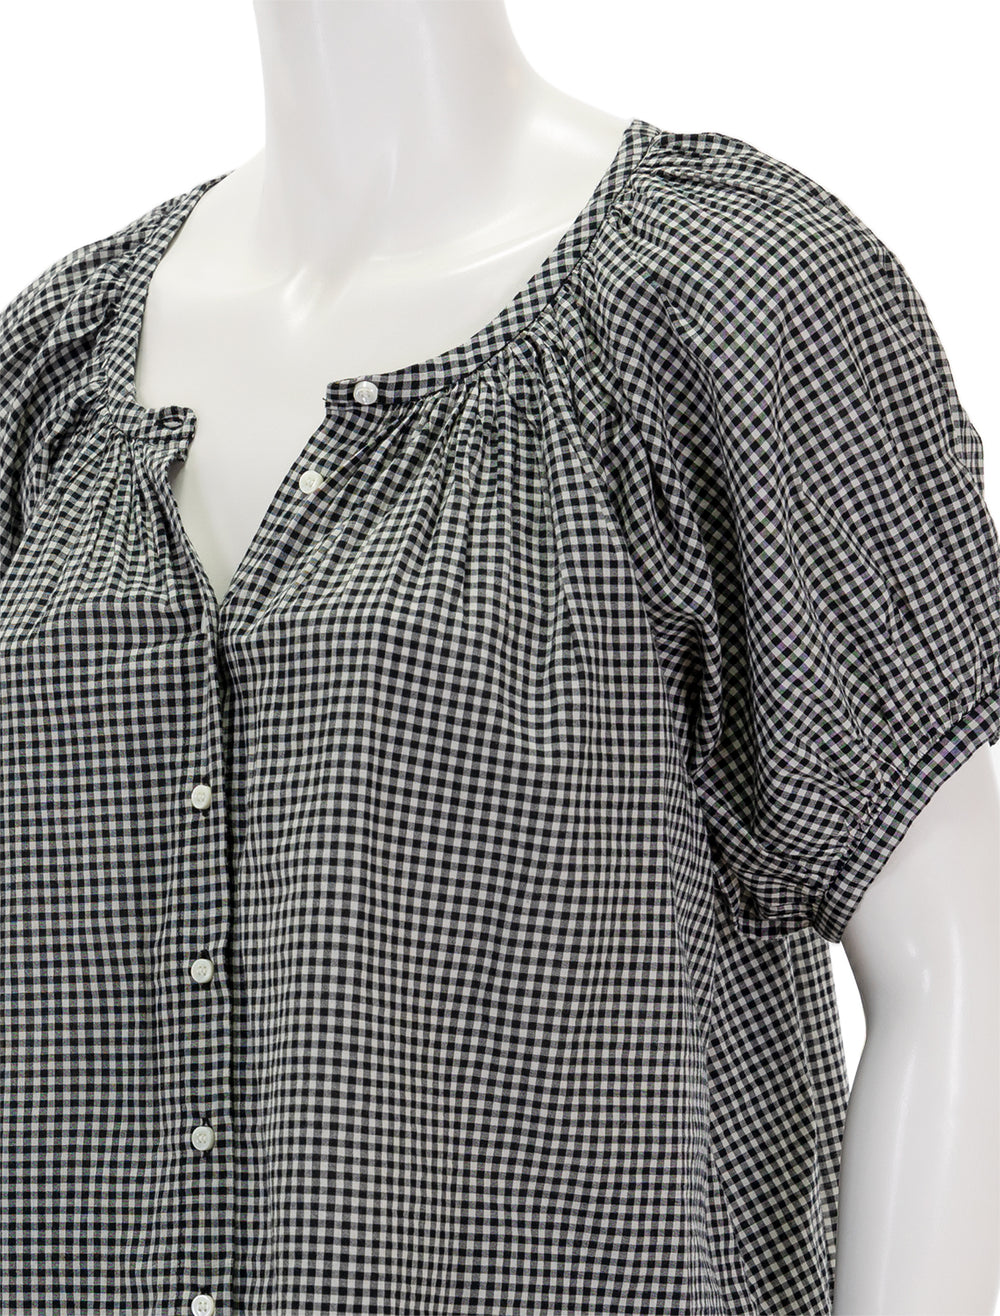 Close-up view of DOEN's june top in la maddalena gingham.